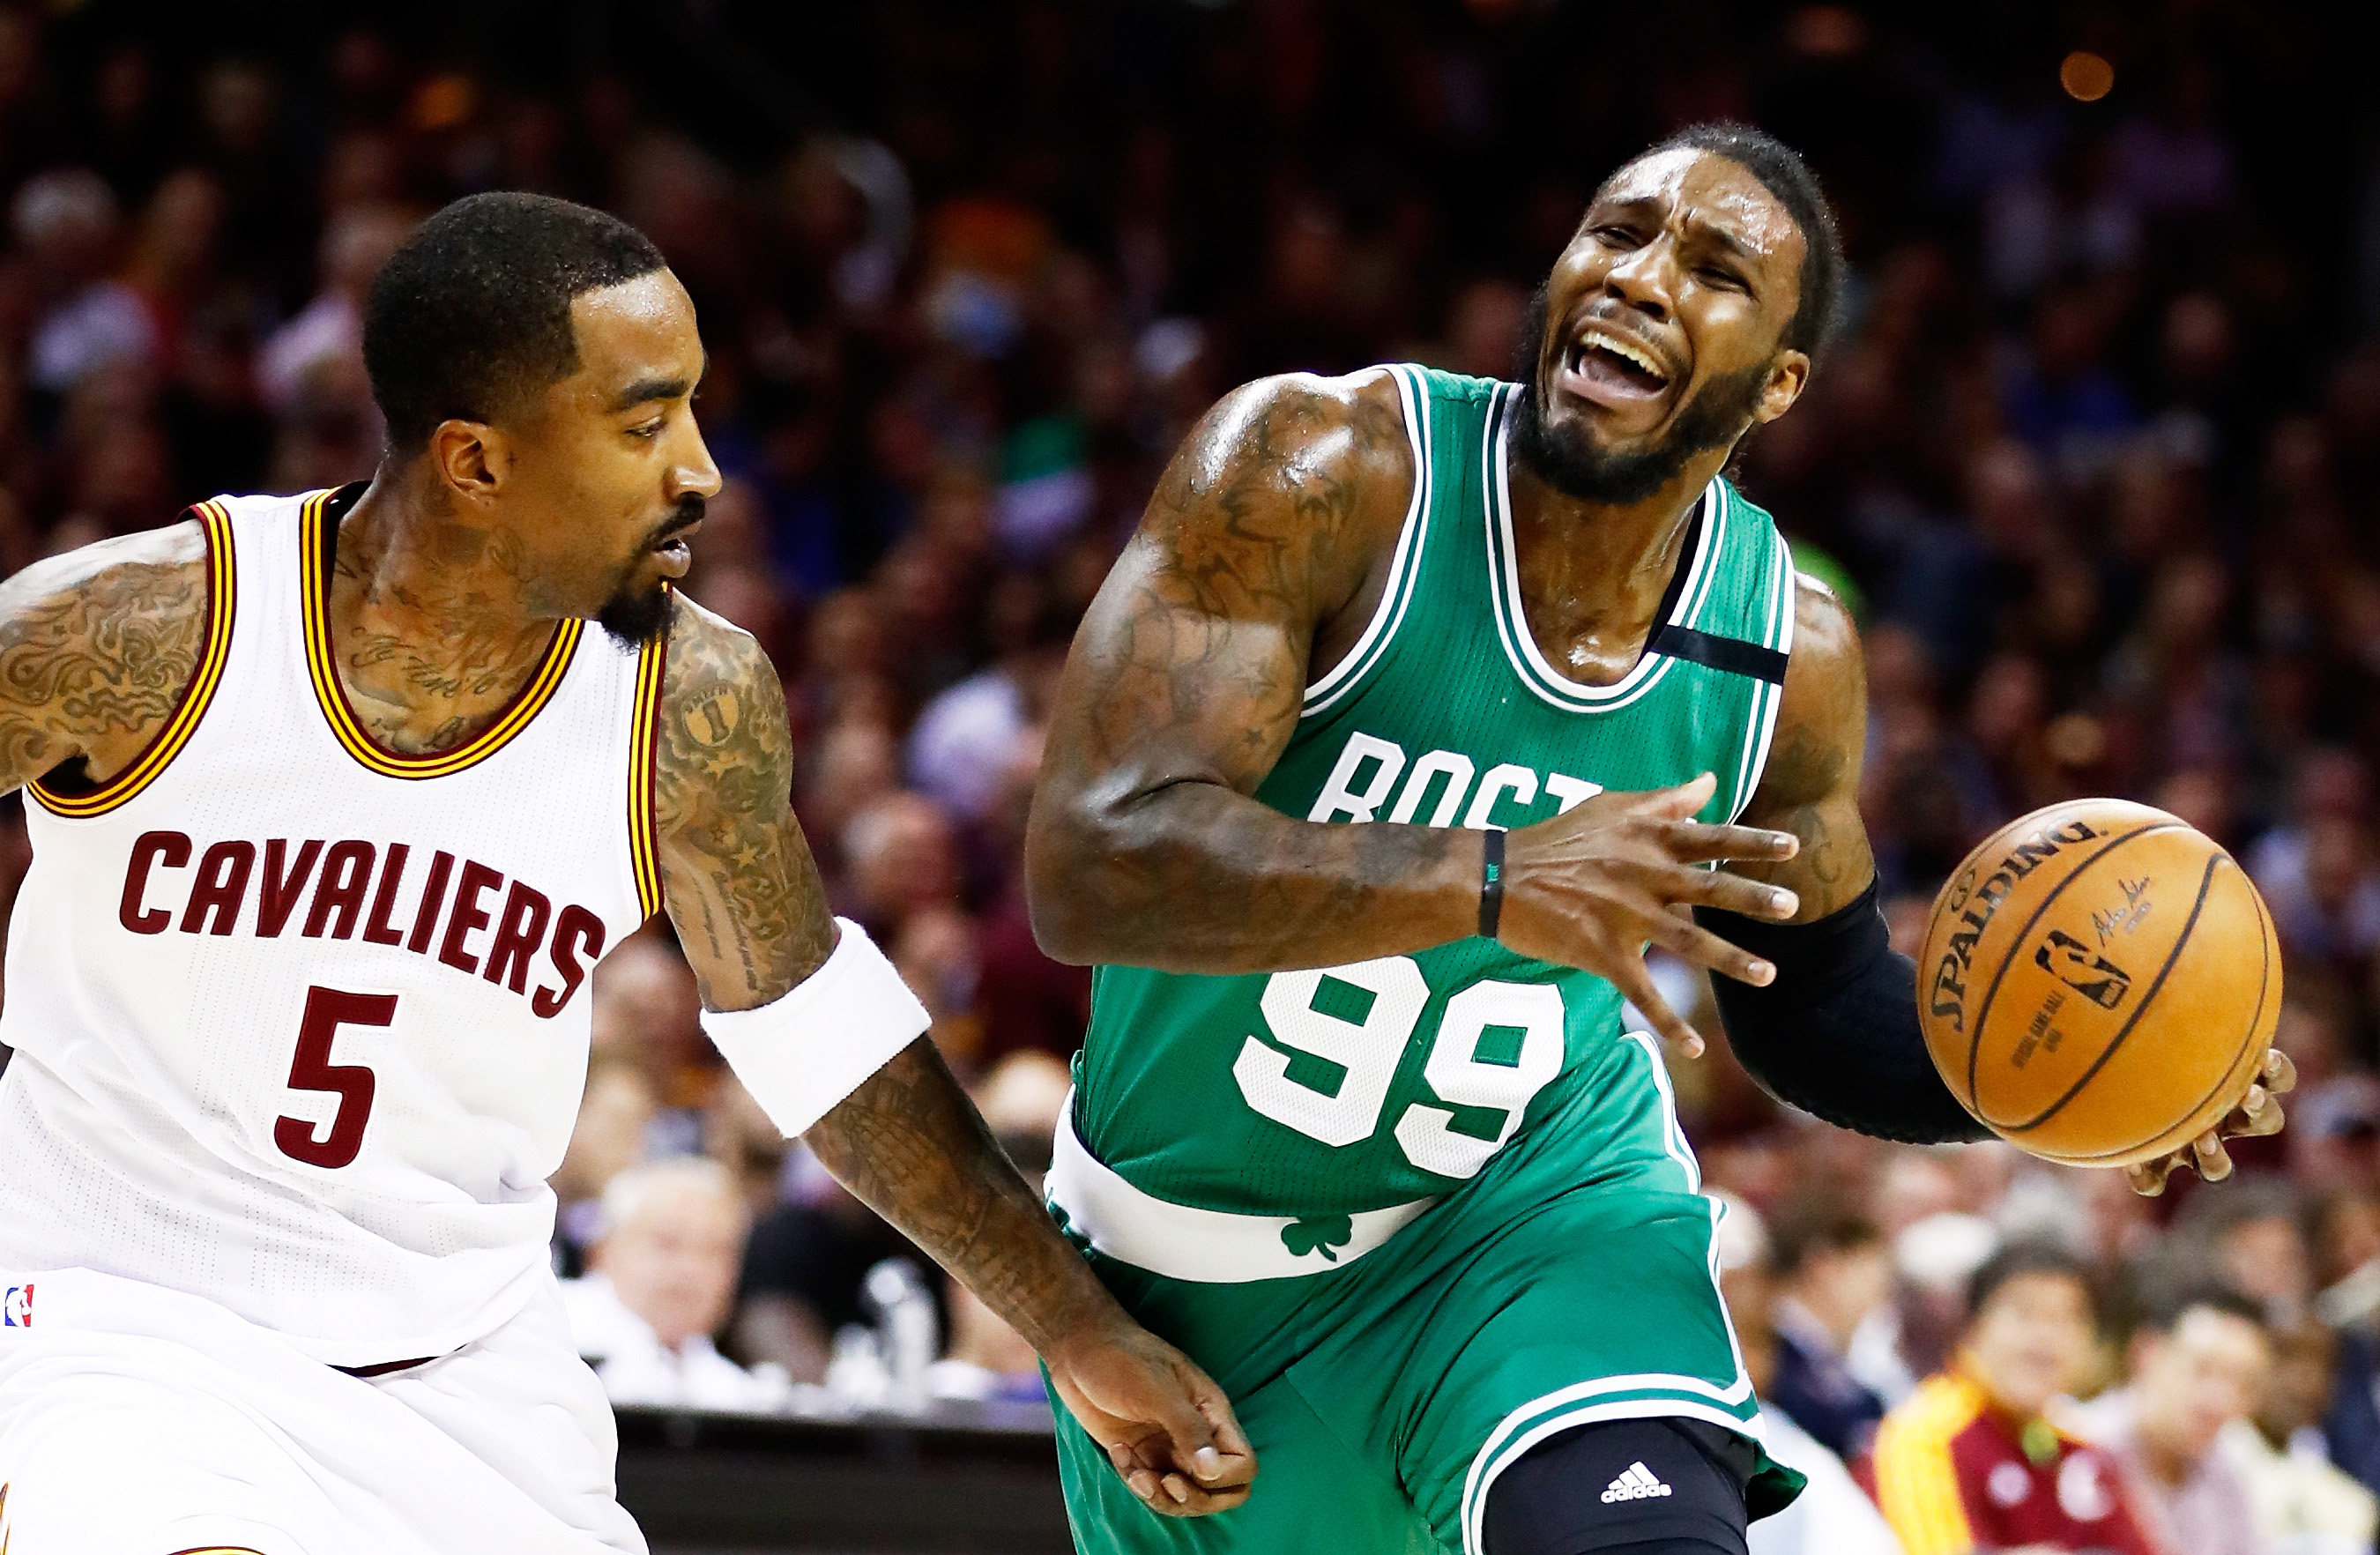 Jae Crowder of the Boston Celtics drives against JR Smith of the Cleveland Cavaliers.